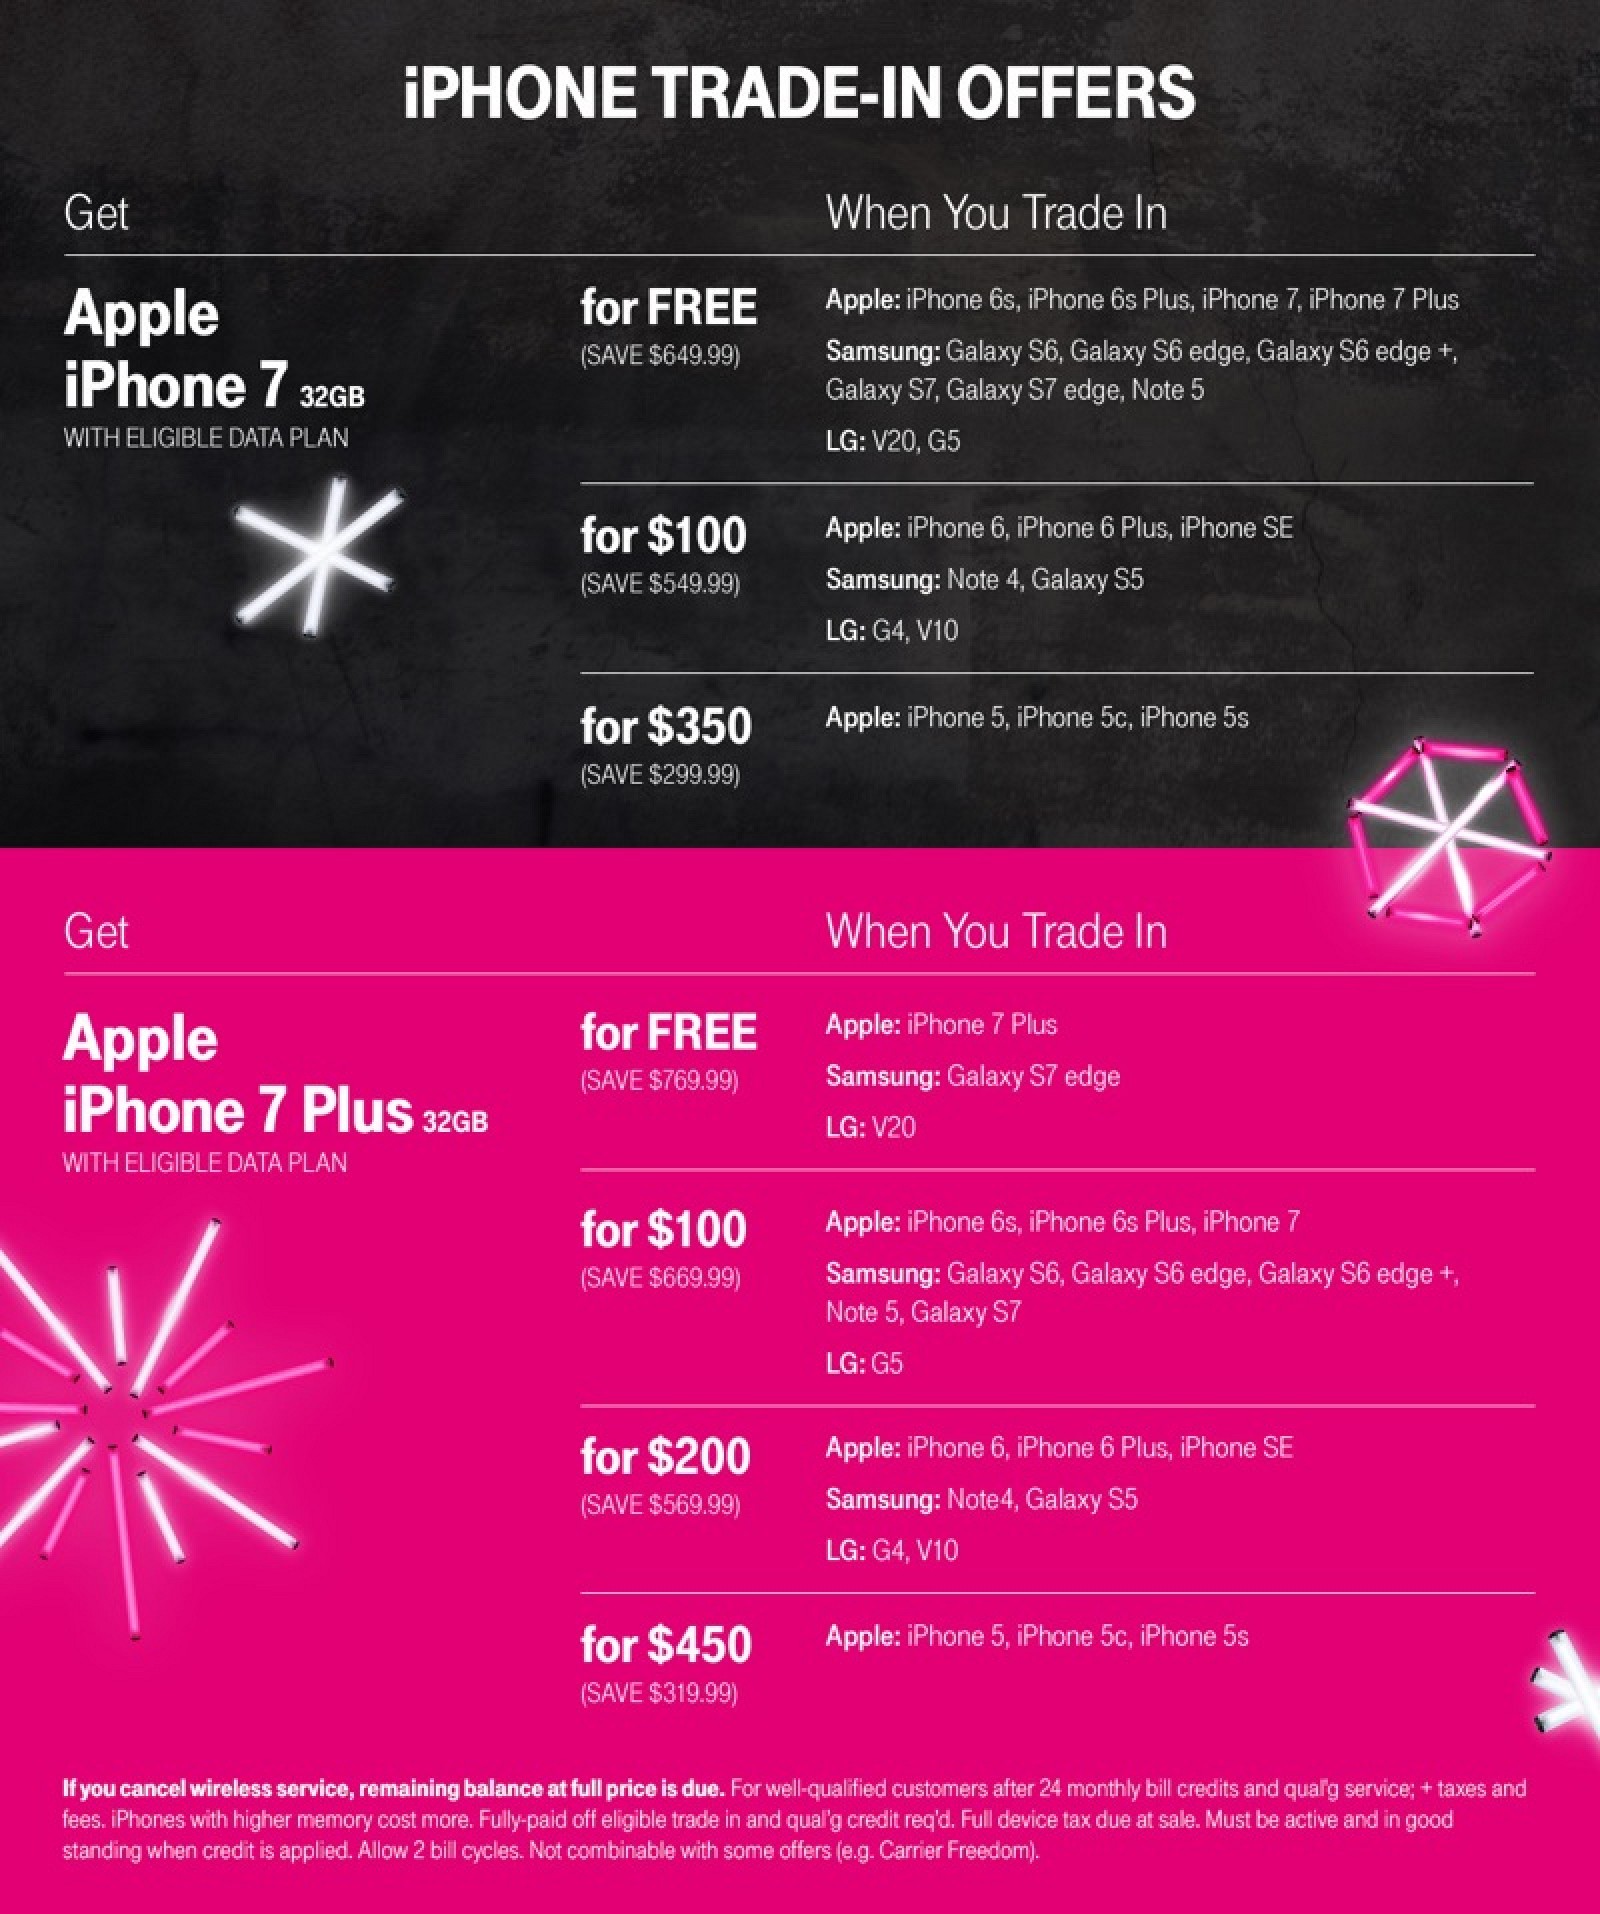 T-Mobile Offers Free iPhone 7 or 7 Plus With Eligible Device Trade-In - Will Tmobile Have Black Friday Deals On The Iphone